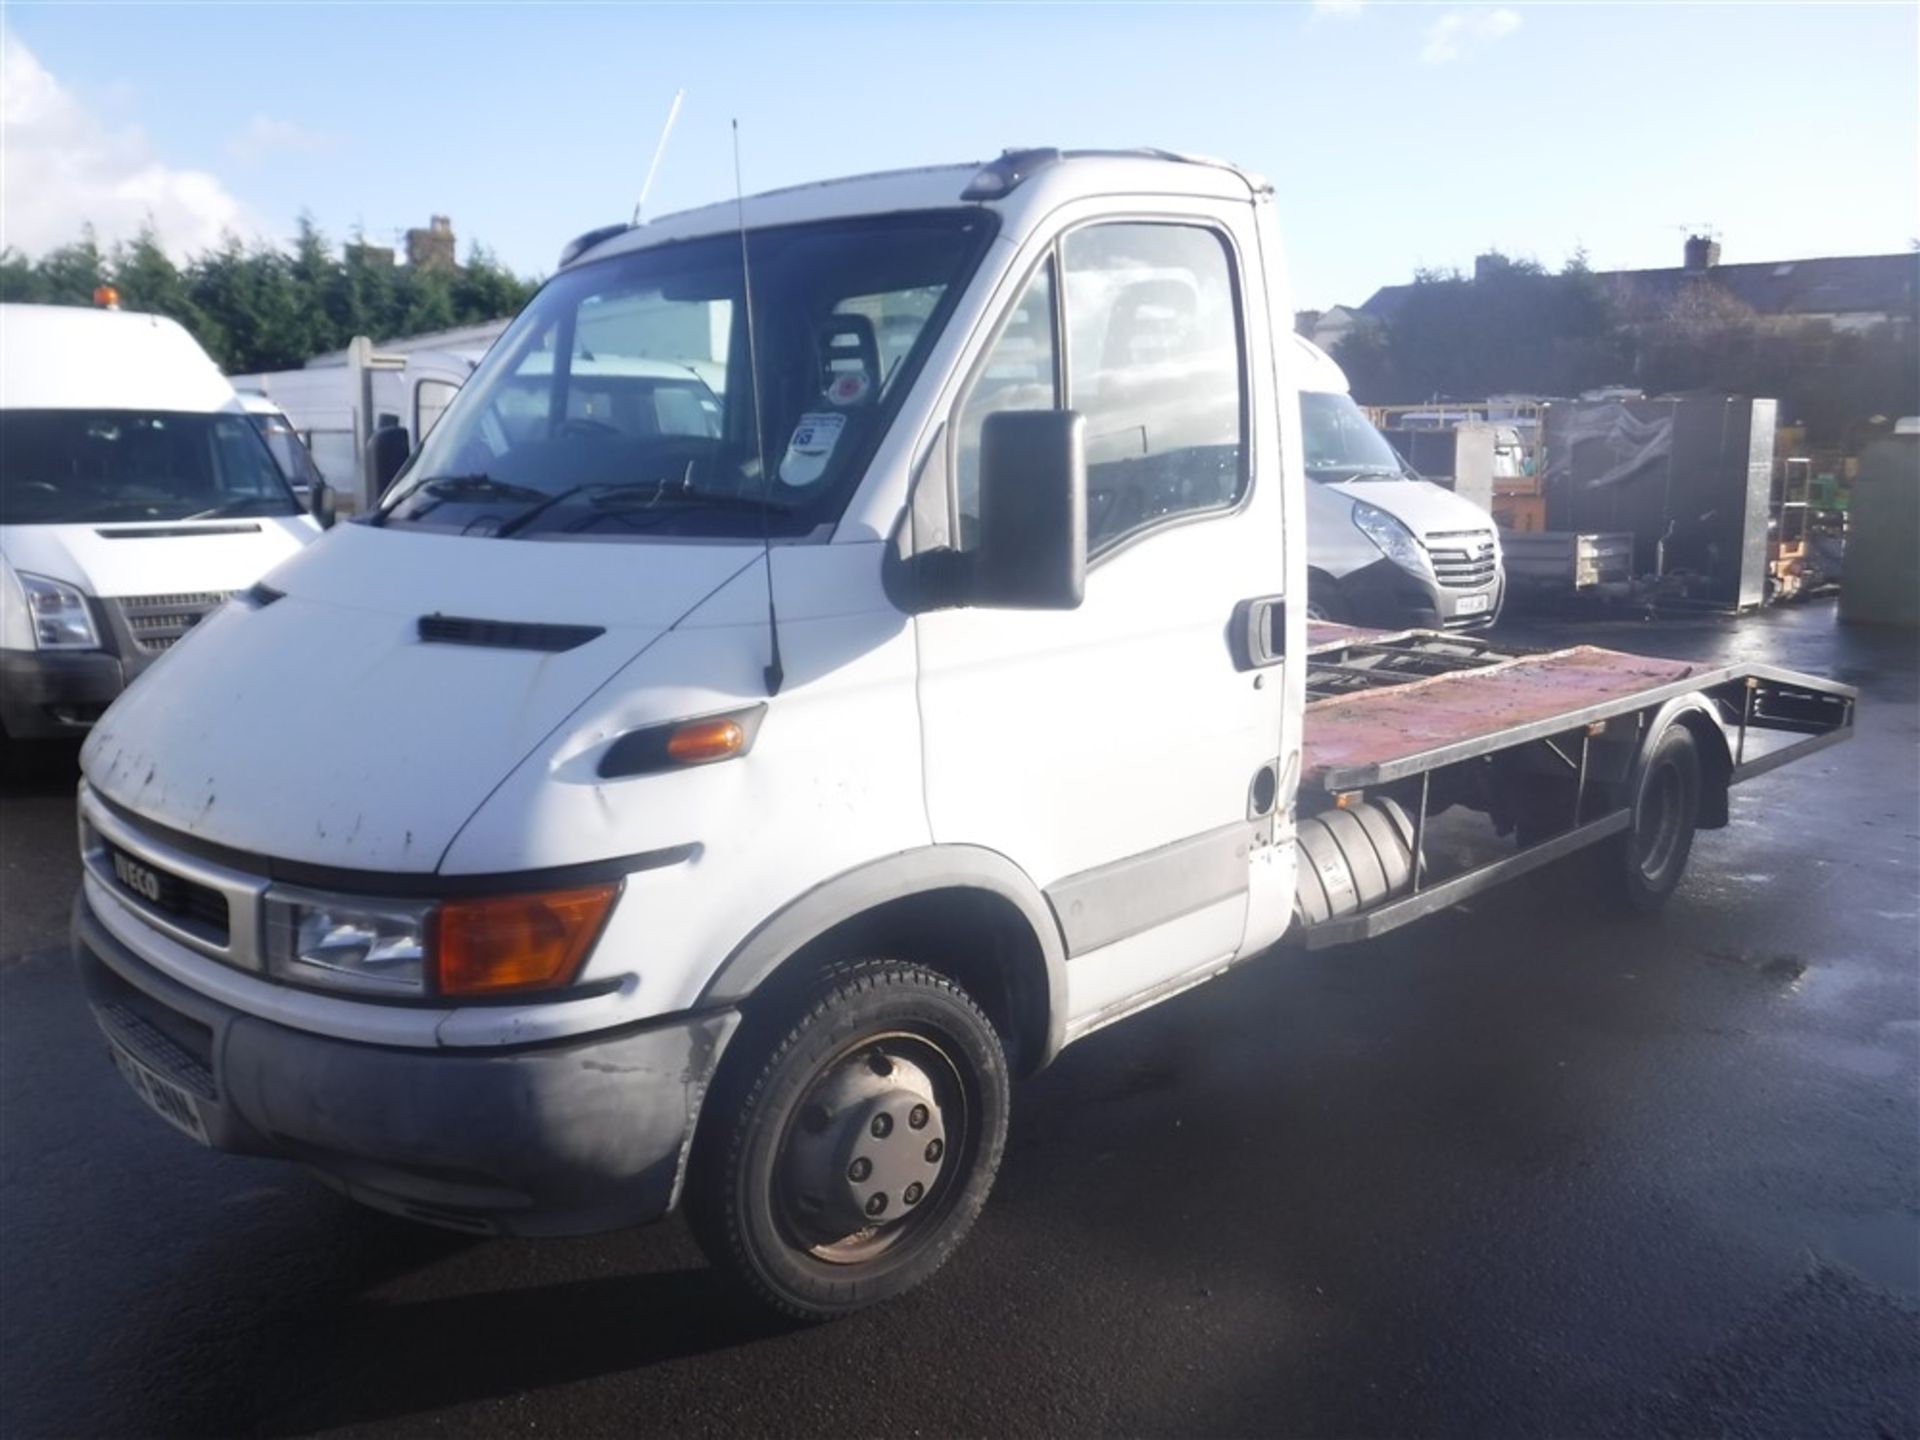 54 reg IVECO 45C15 RECOVERY TRUCK, 1ST REG 10/04, 512965KM, V5 HERE, 2 FORMER KEEPERS [NO VAT] - Image 2 of 5